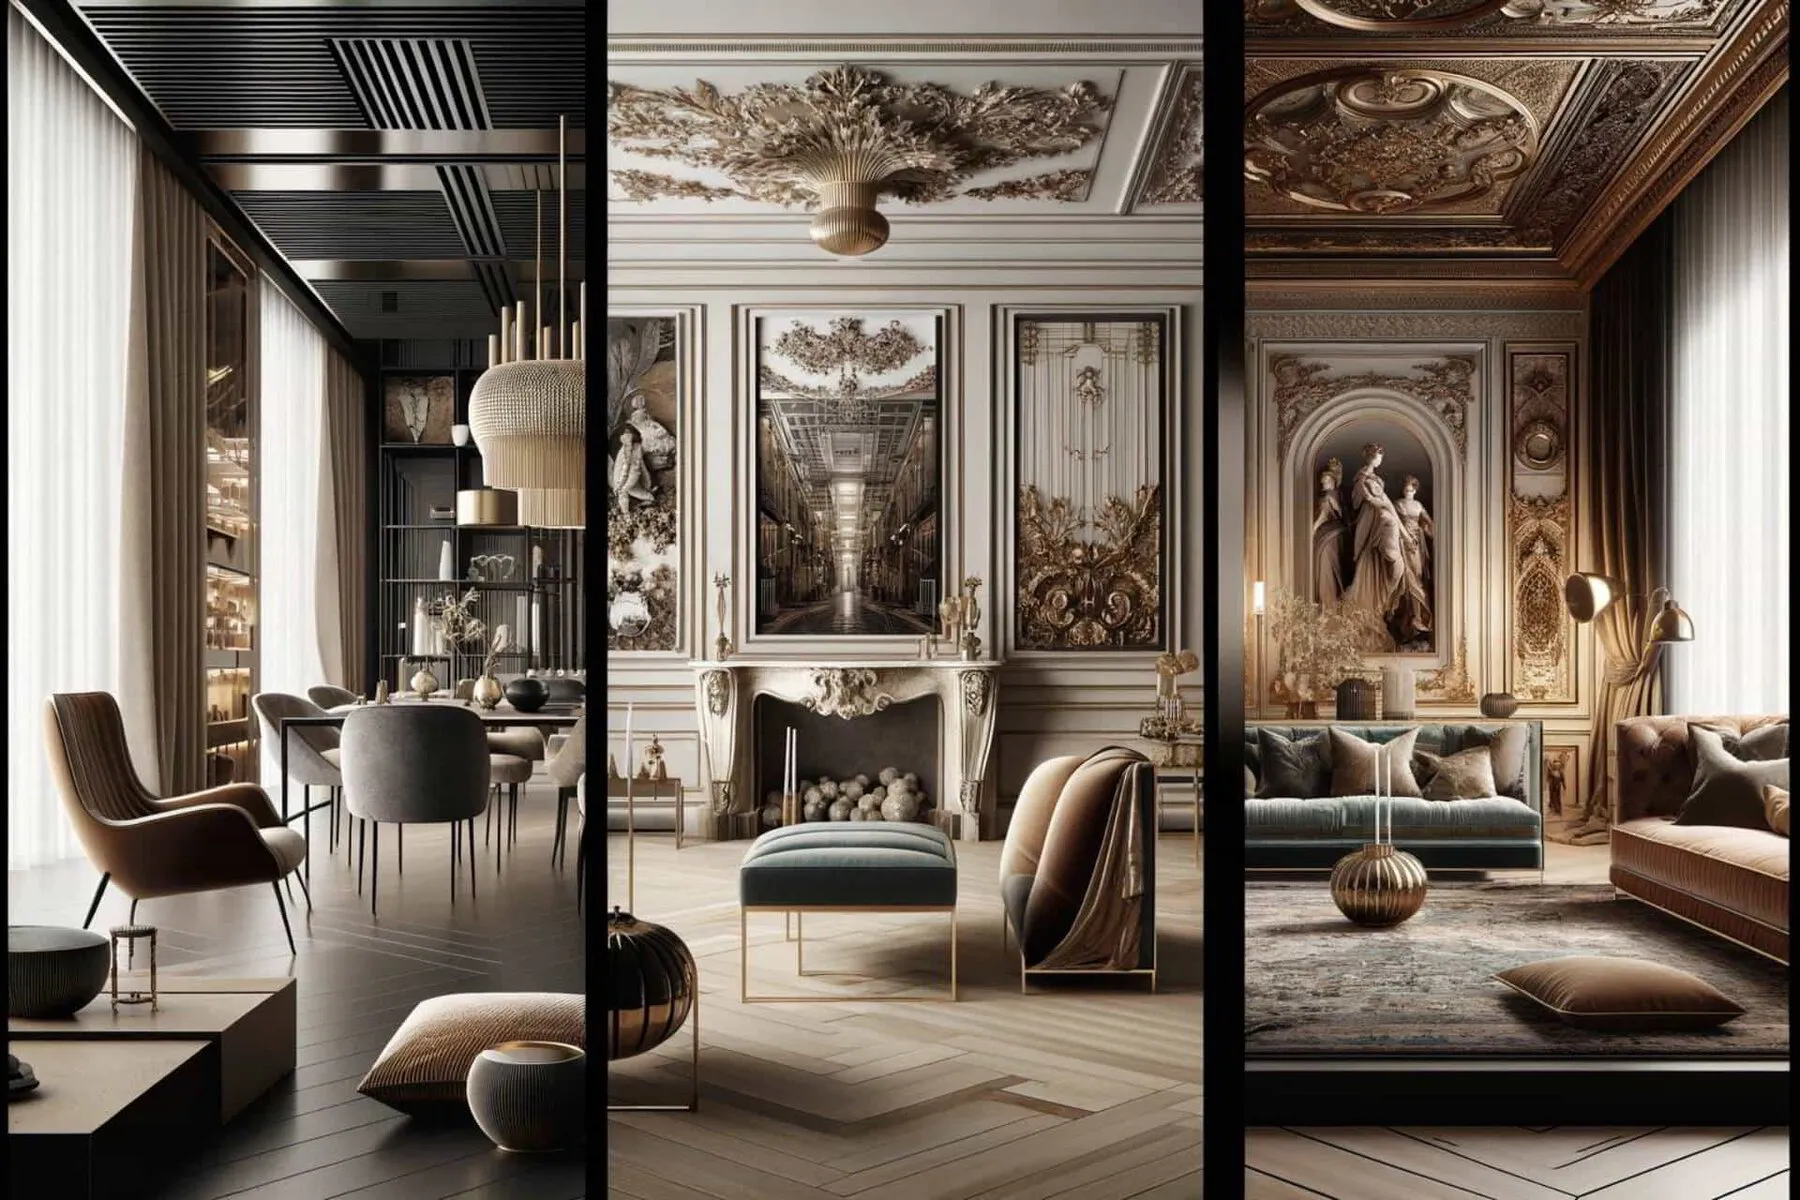 A sophisticated, luxurious interior design collage showcasing three distinct styles_ Modern, Traditional, and Transitional